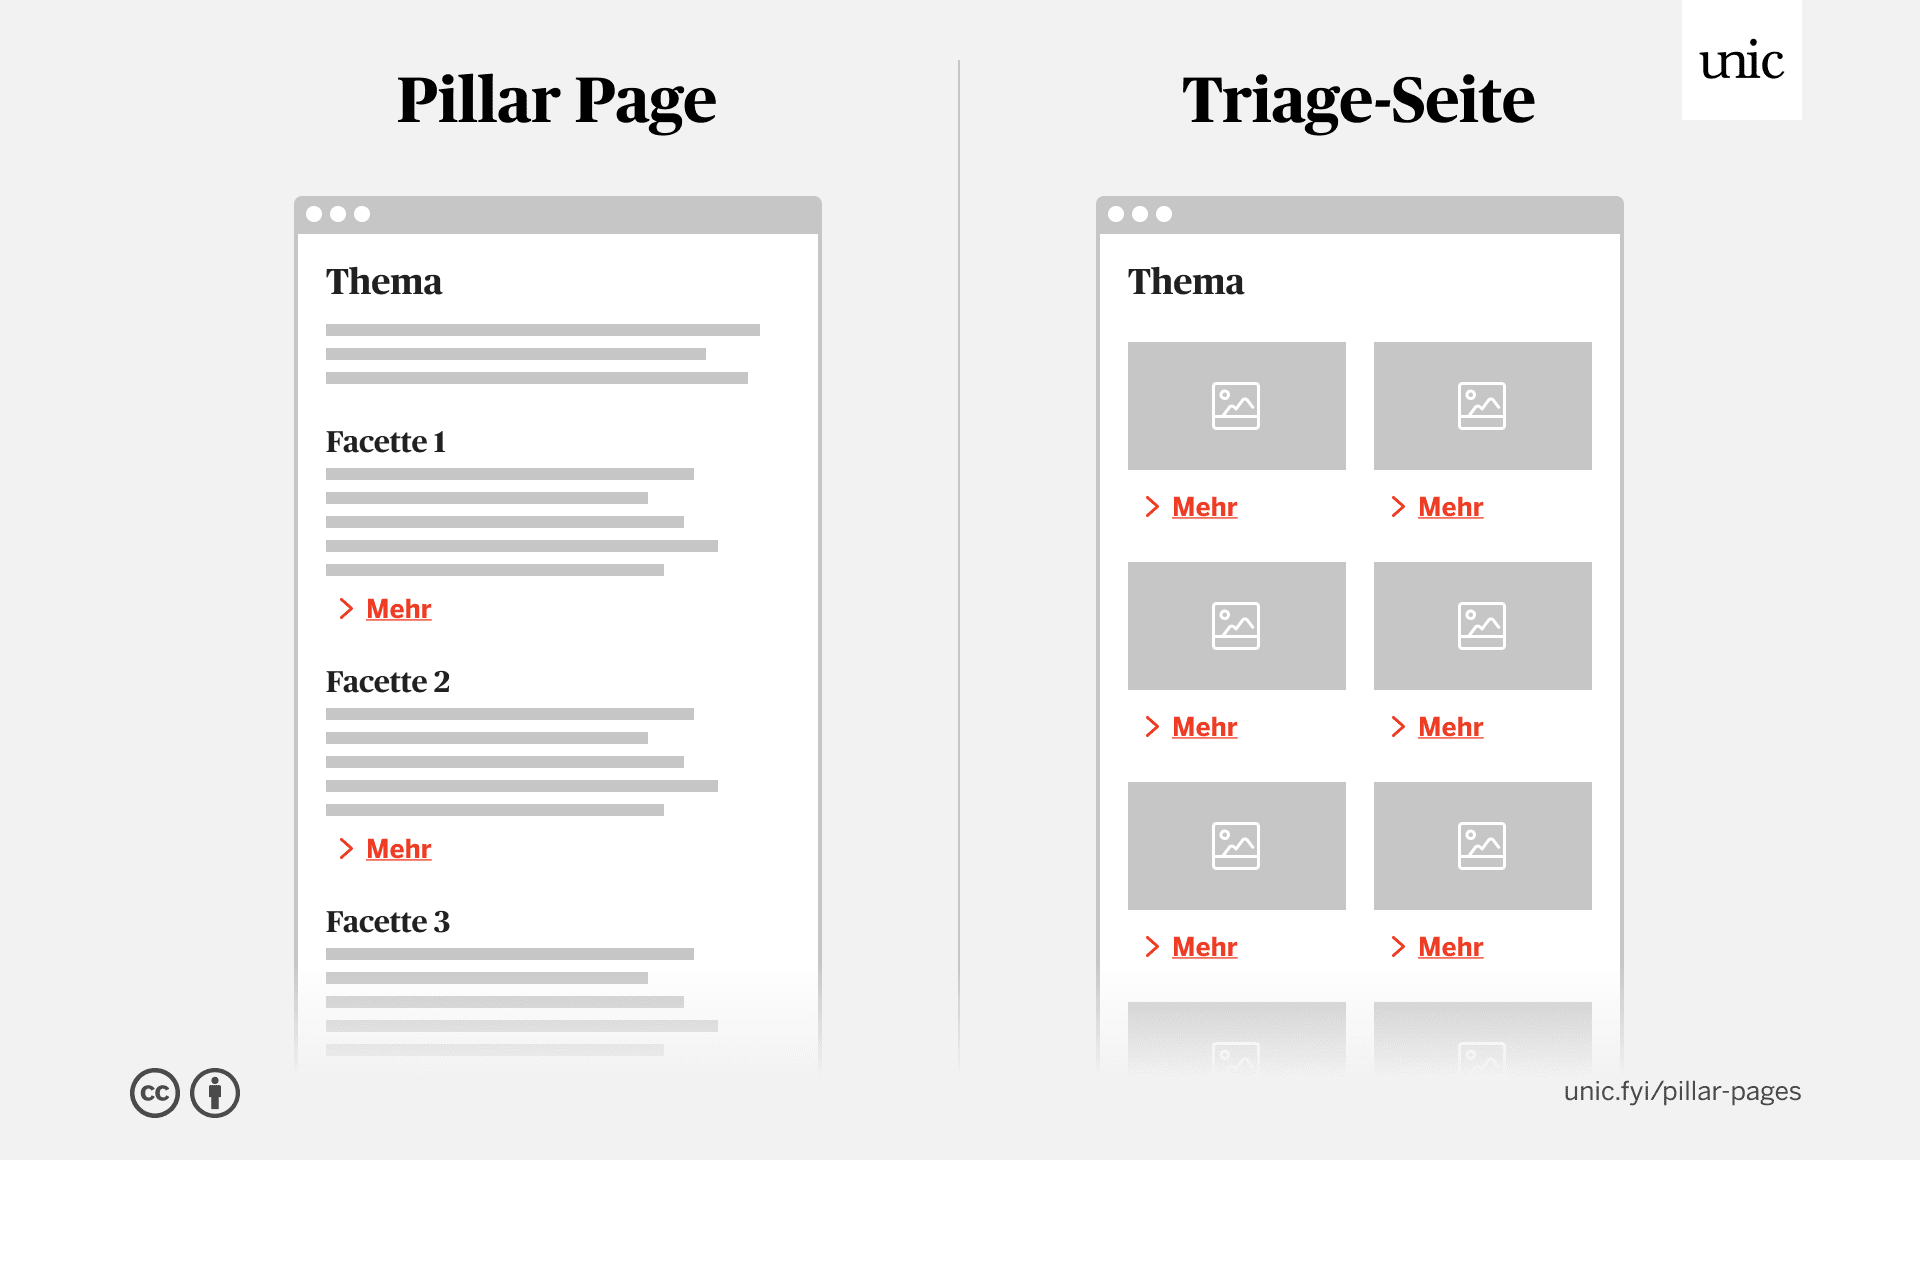 A pillar page compared to a triage page